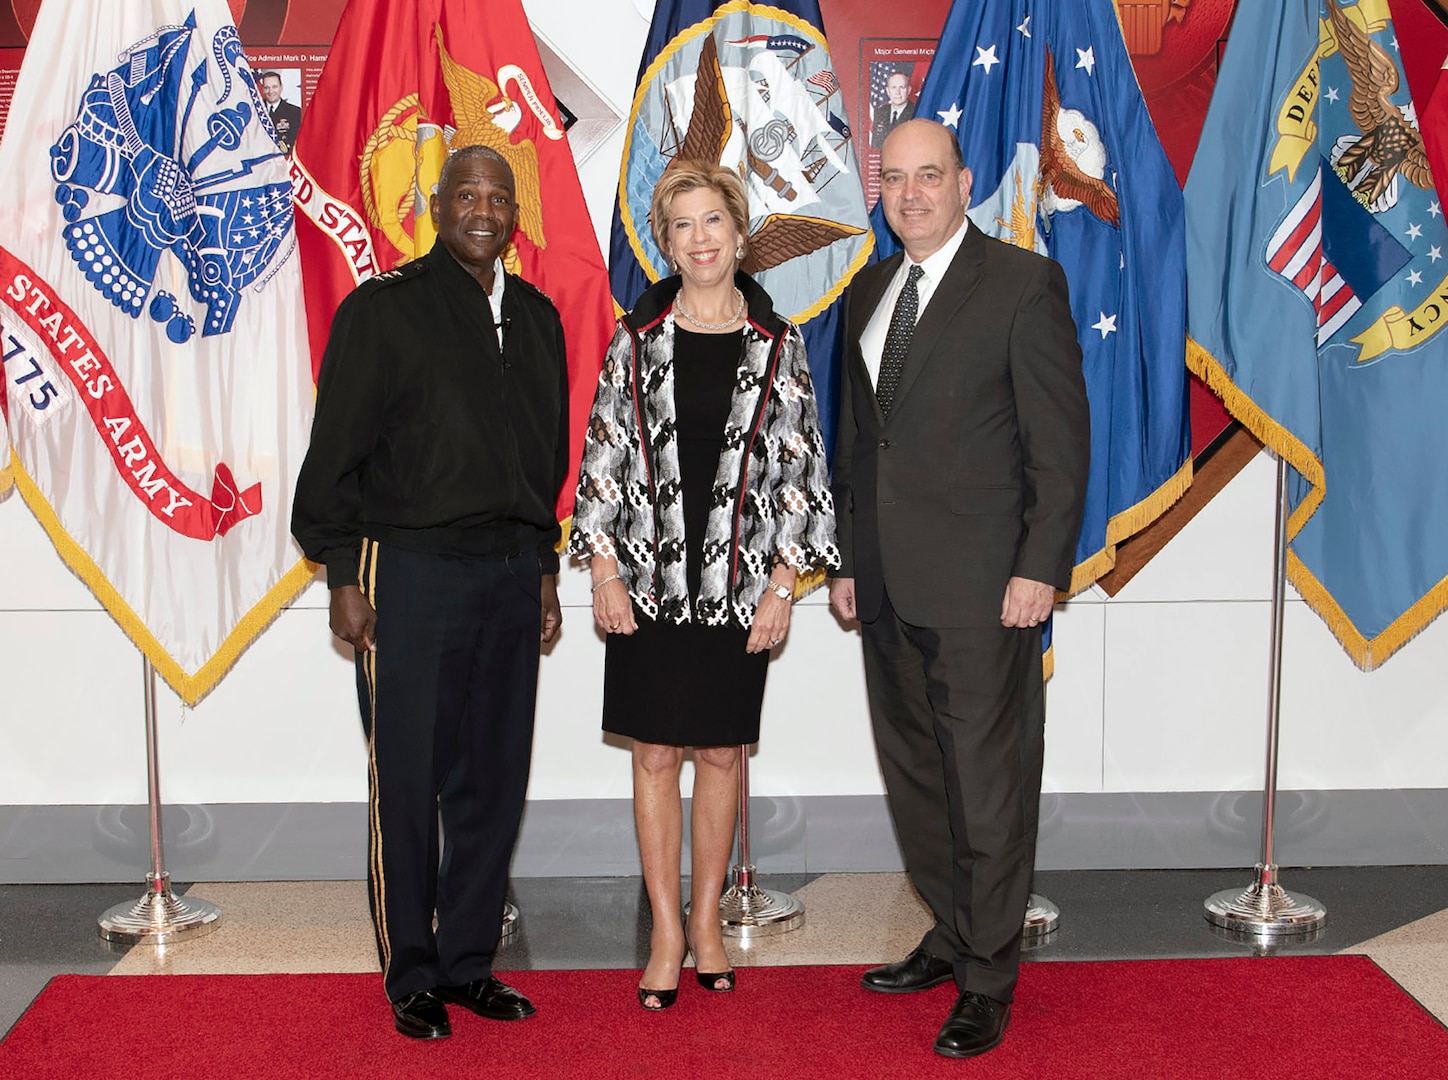 DLA Director Army Lt. Gen. Darrell Williams (left) poses for a photo with Undersecretary of Defense for Acquisition and Sustainment Ellen Lord (middle) and DLA Acquisition Director Matt Beebe before DLA Industry Day July 31 at the McNamara Headquarters Complex on Fort Belvoir, Virginia.